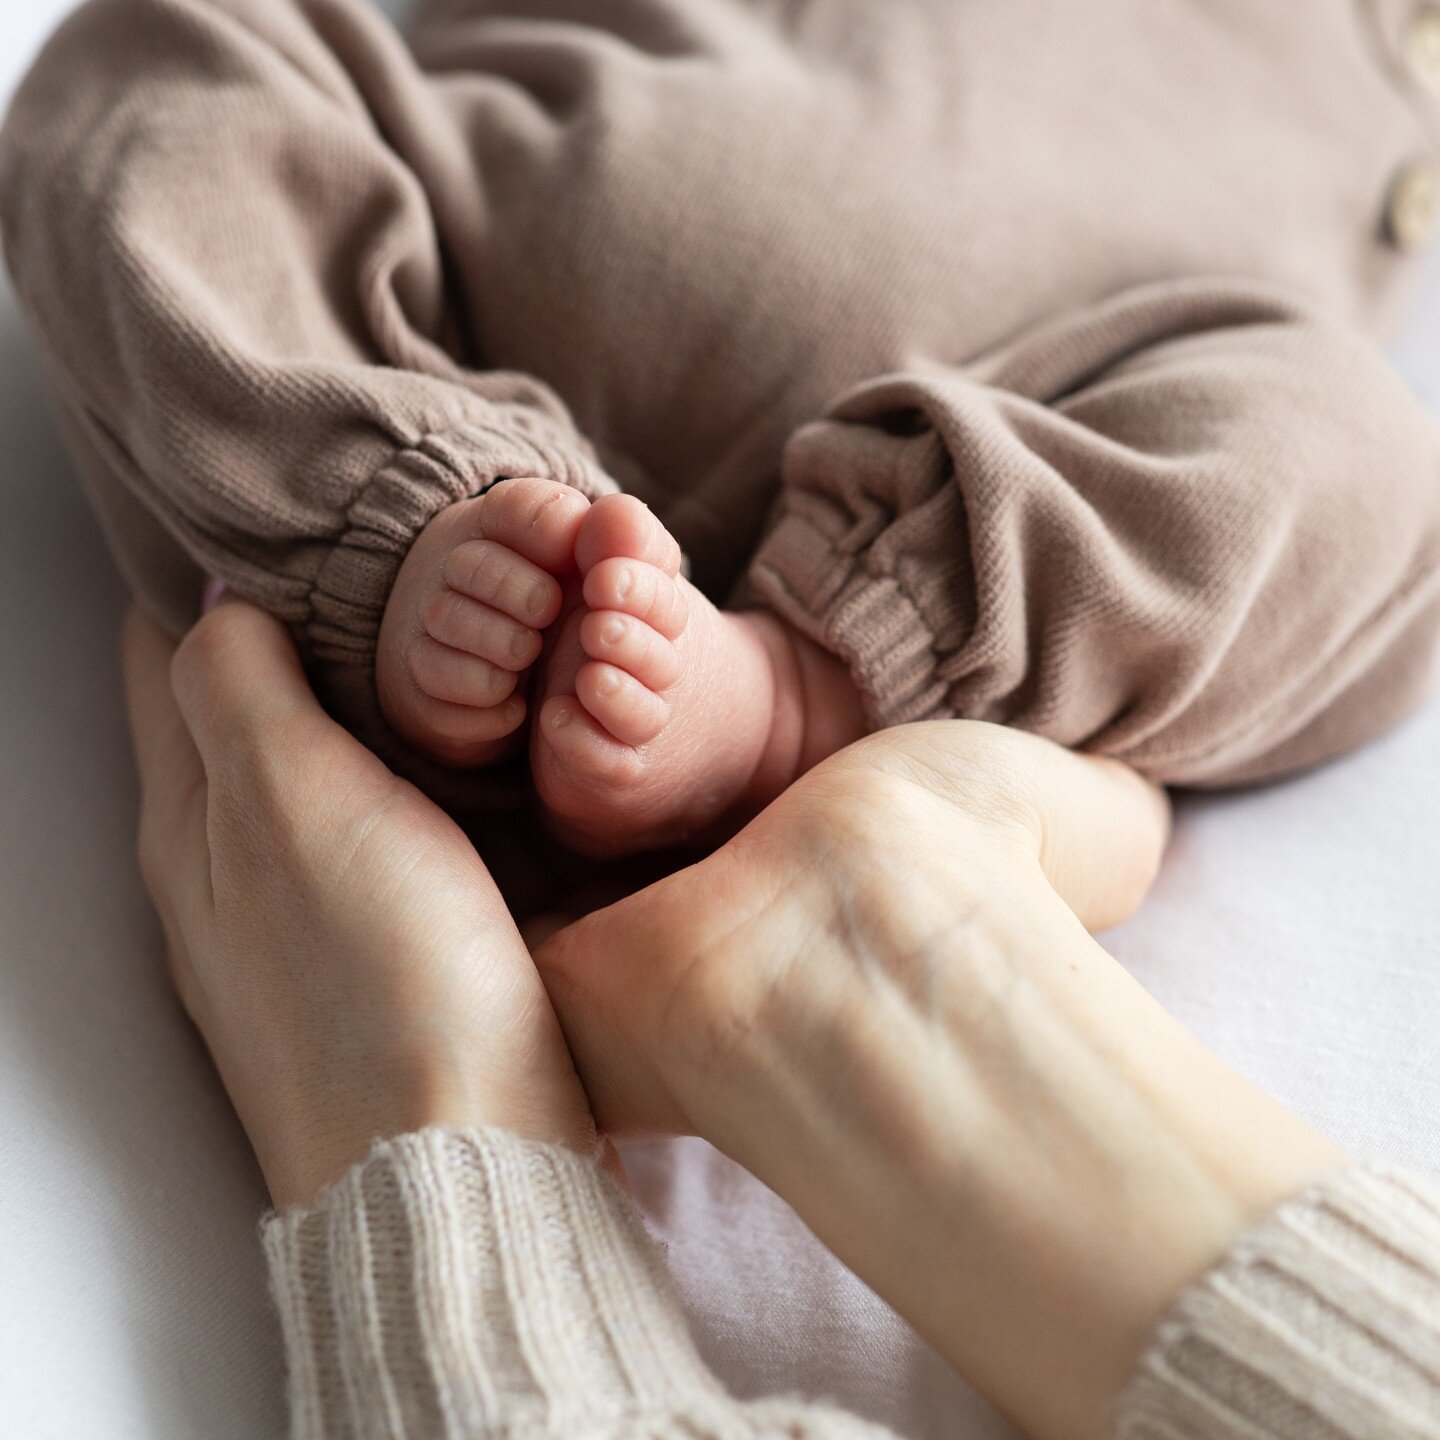 There's nothing more precious than the tiny toes of a sleeping baby.
.
.
.
.
.
.
.
.
.
.
.
#newbornphotographer #nhnewbornphotographer #nhfamilyphotographer #babyphotographer #motherhoodanthology #motherhoodphotography #manewbornphotographer #bostonn